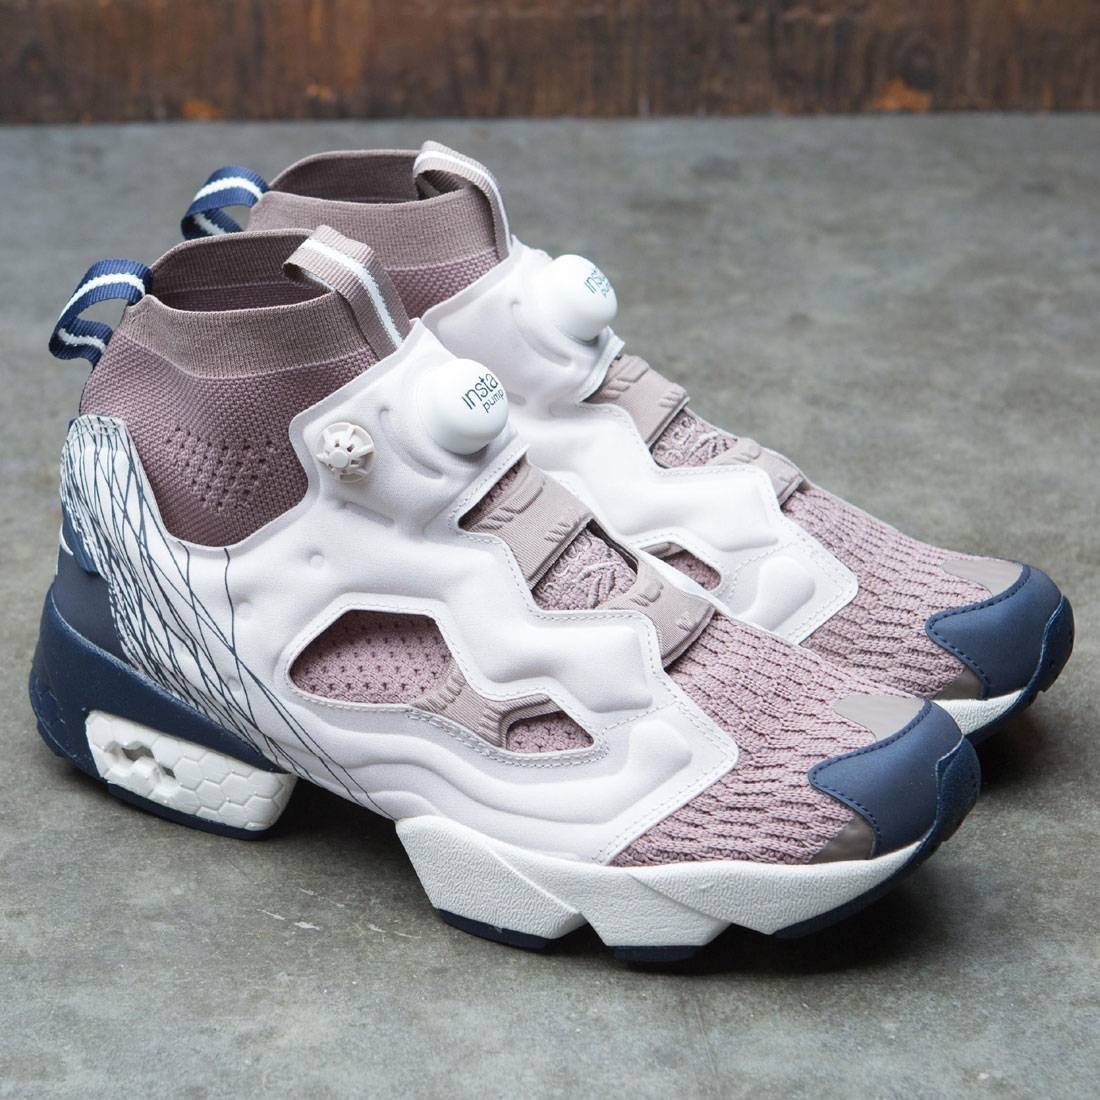 The Reebok InstaPump Fury OG Ultraknit Gets Two New Colorways, But Retail  Price May Shock You - WearTesters